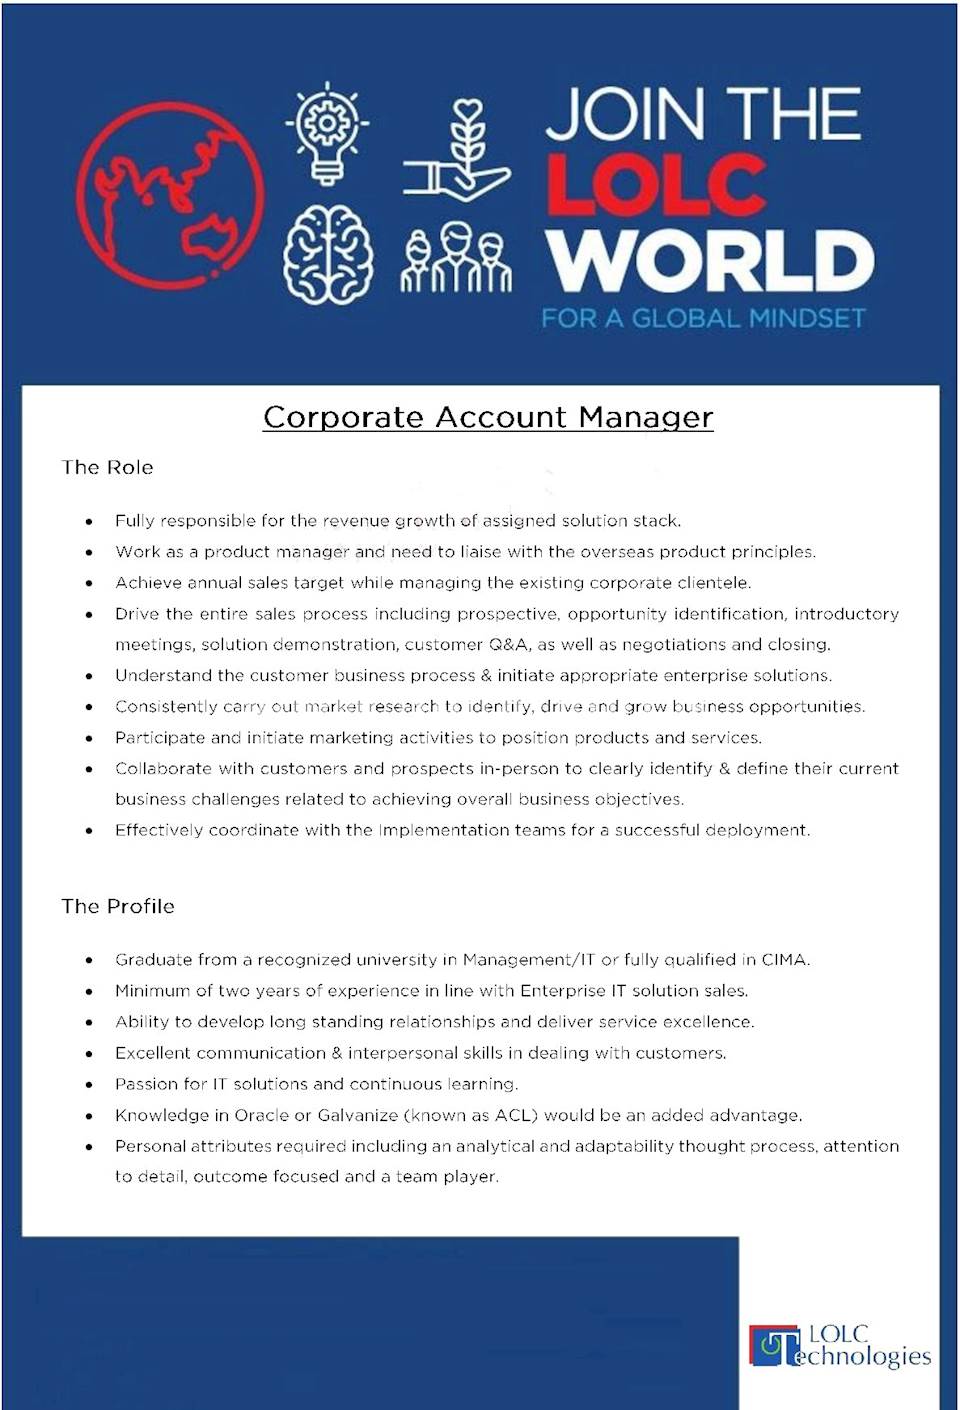 Corporate Account Manager